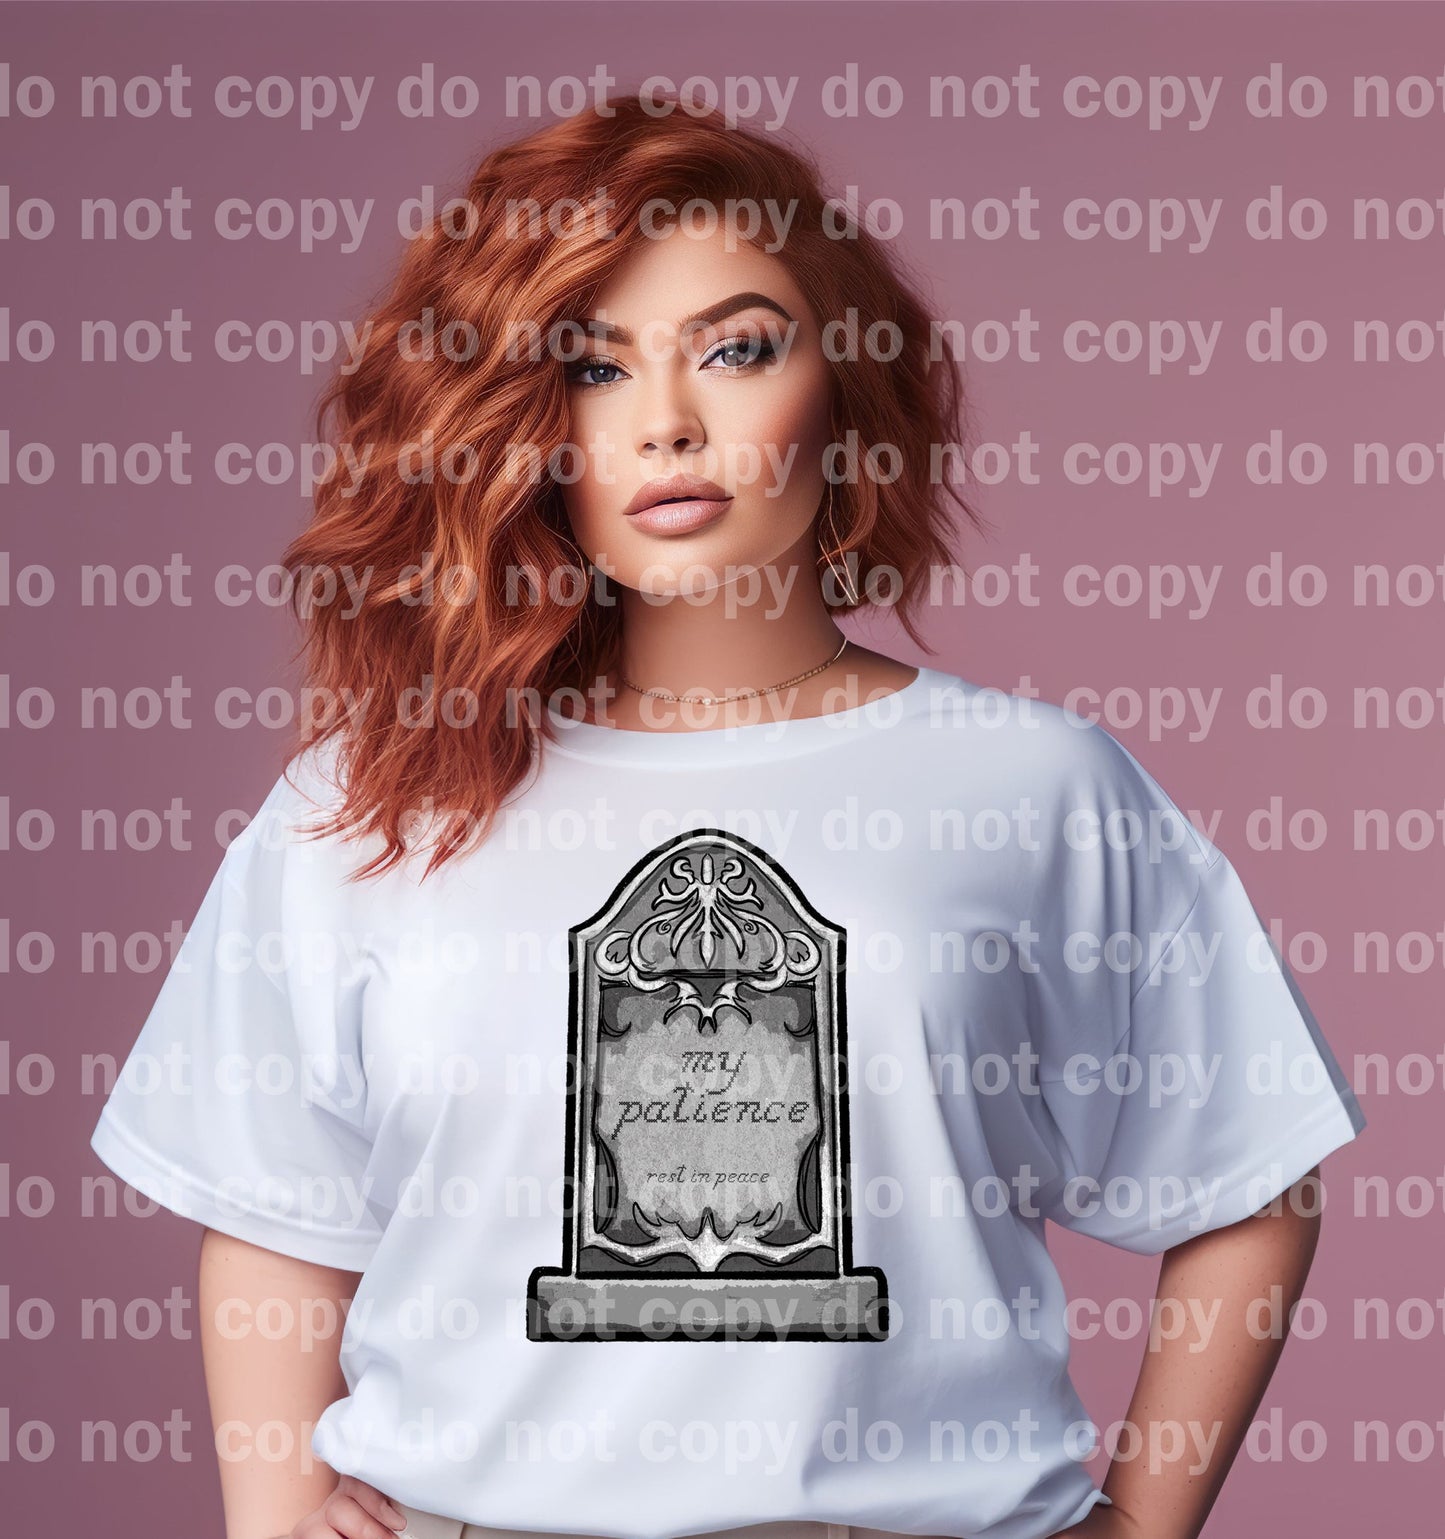 My Patience Rest In Peace Dream Print or Sublimation Print